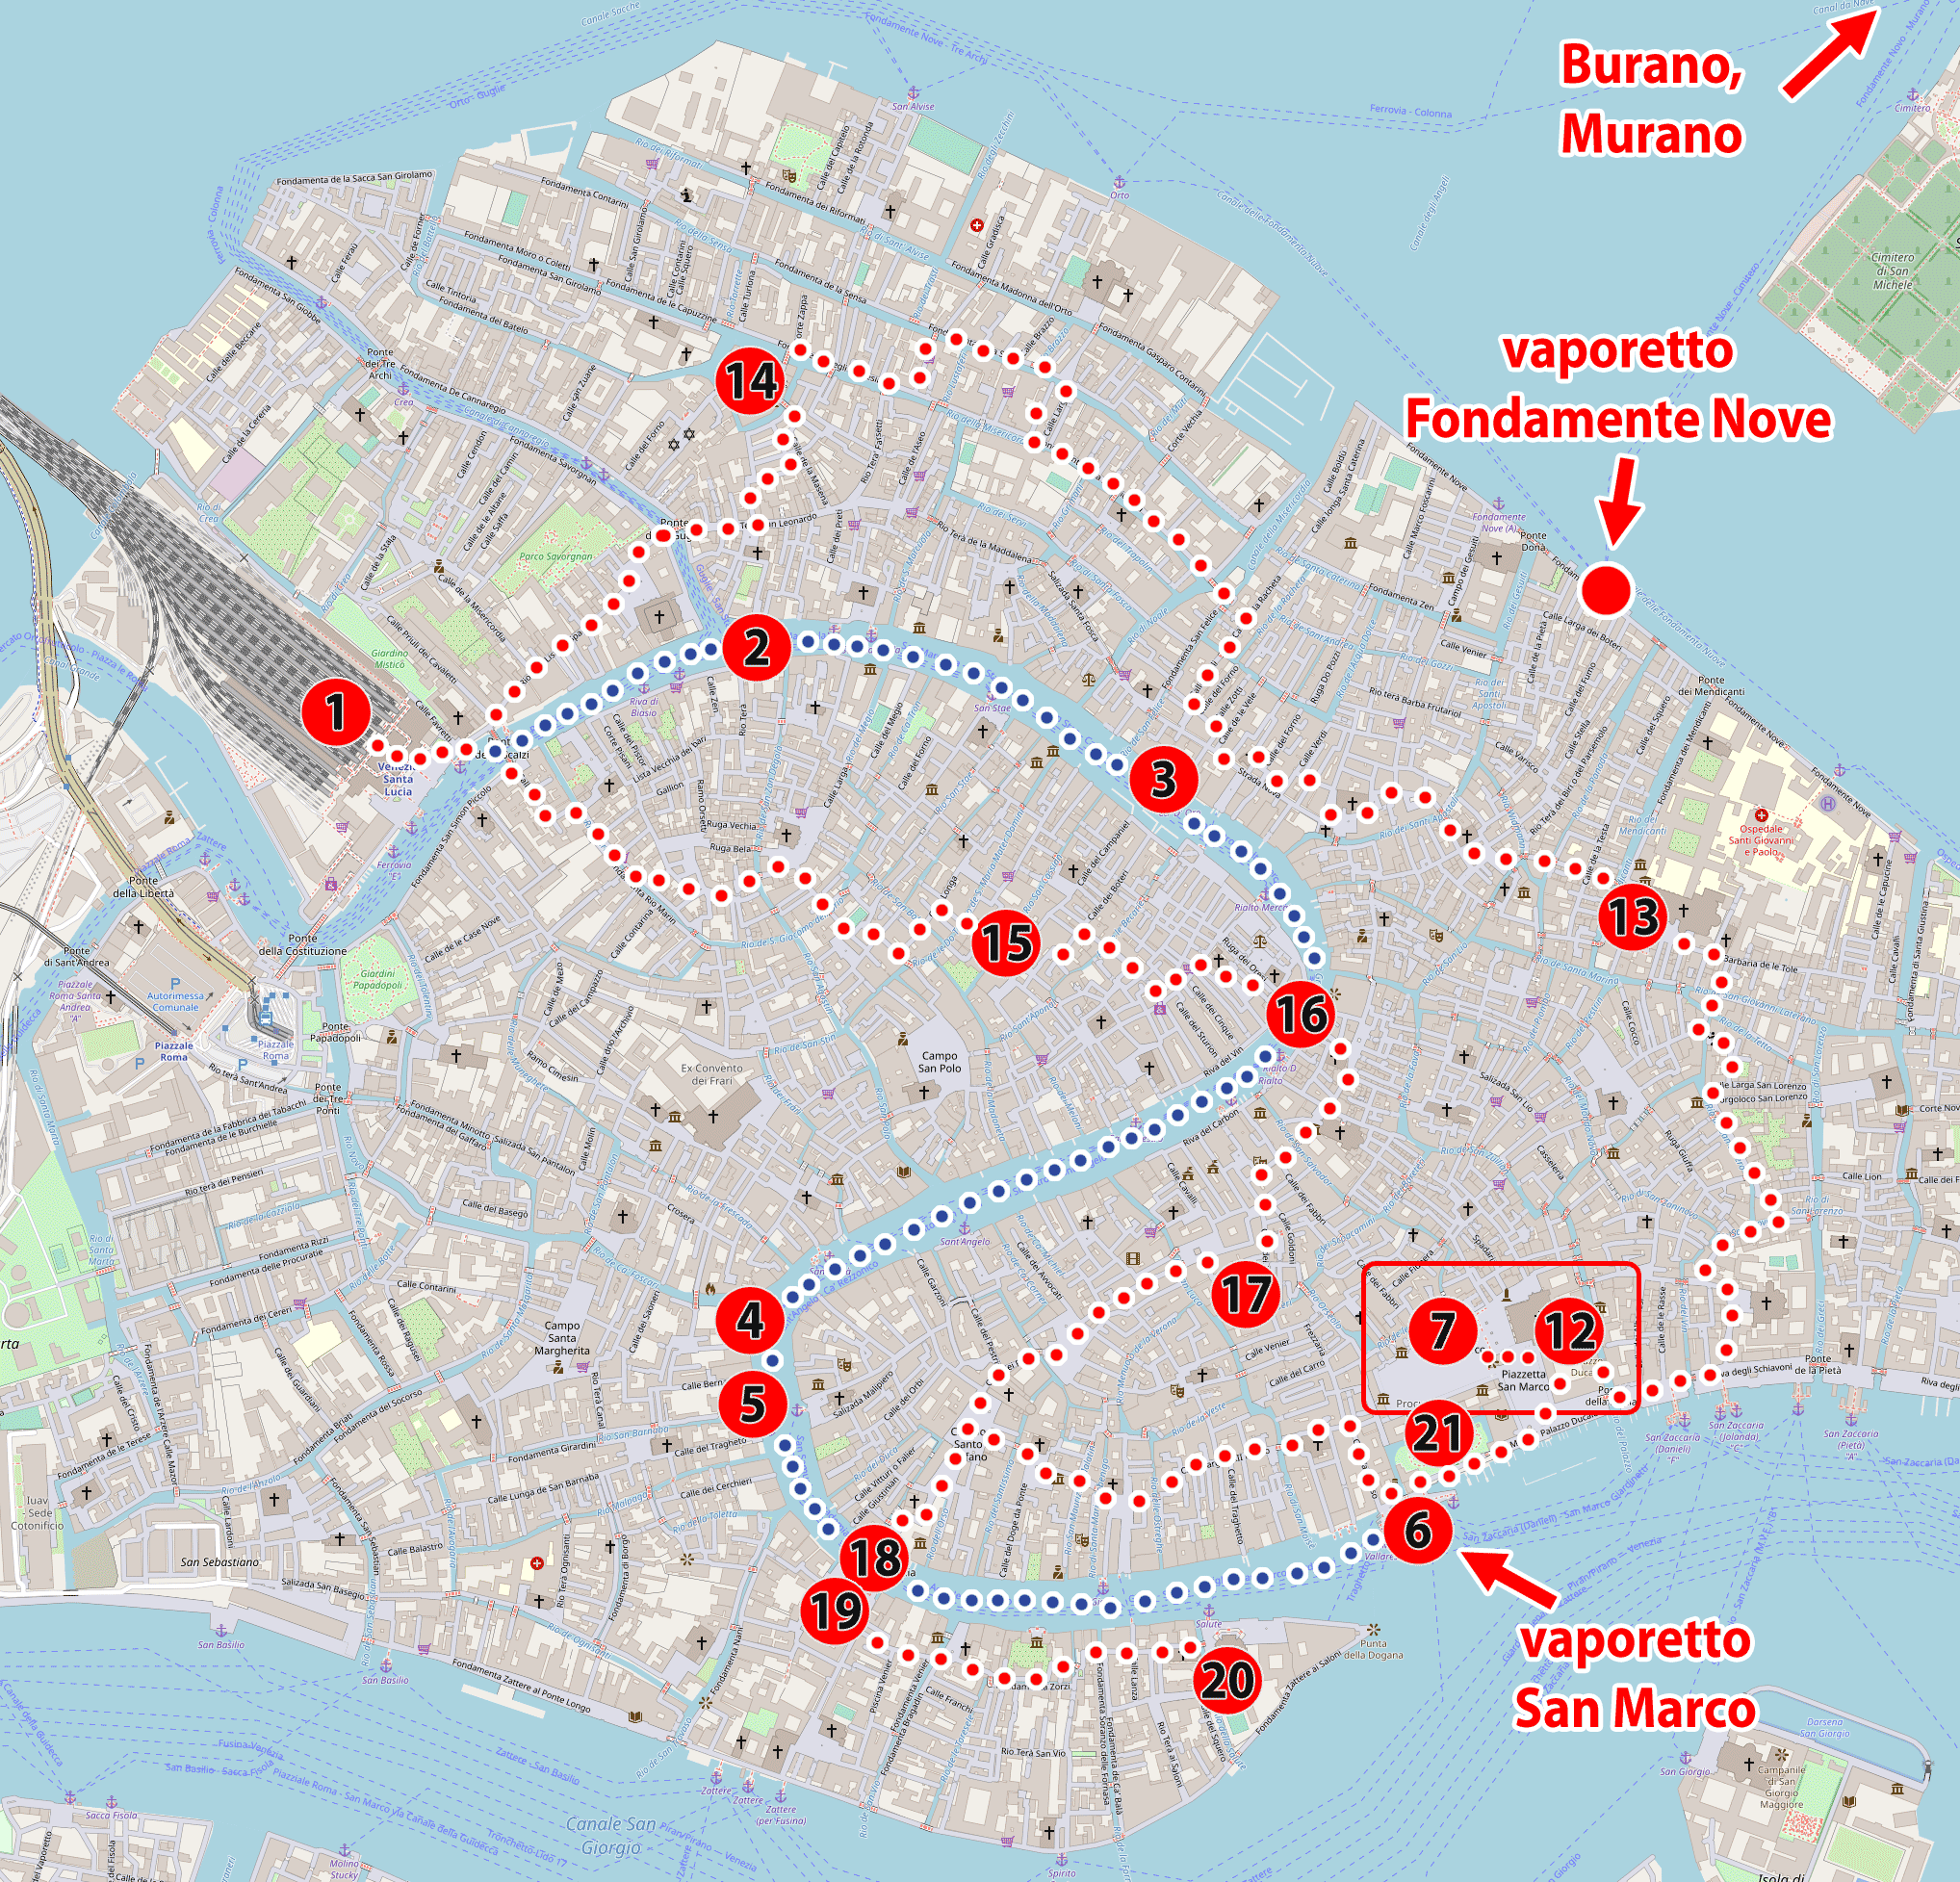 Venice – PDF tourist map – What to see? Guide.